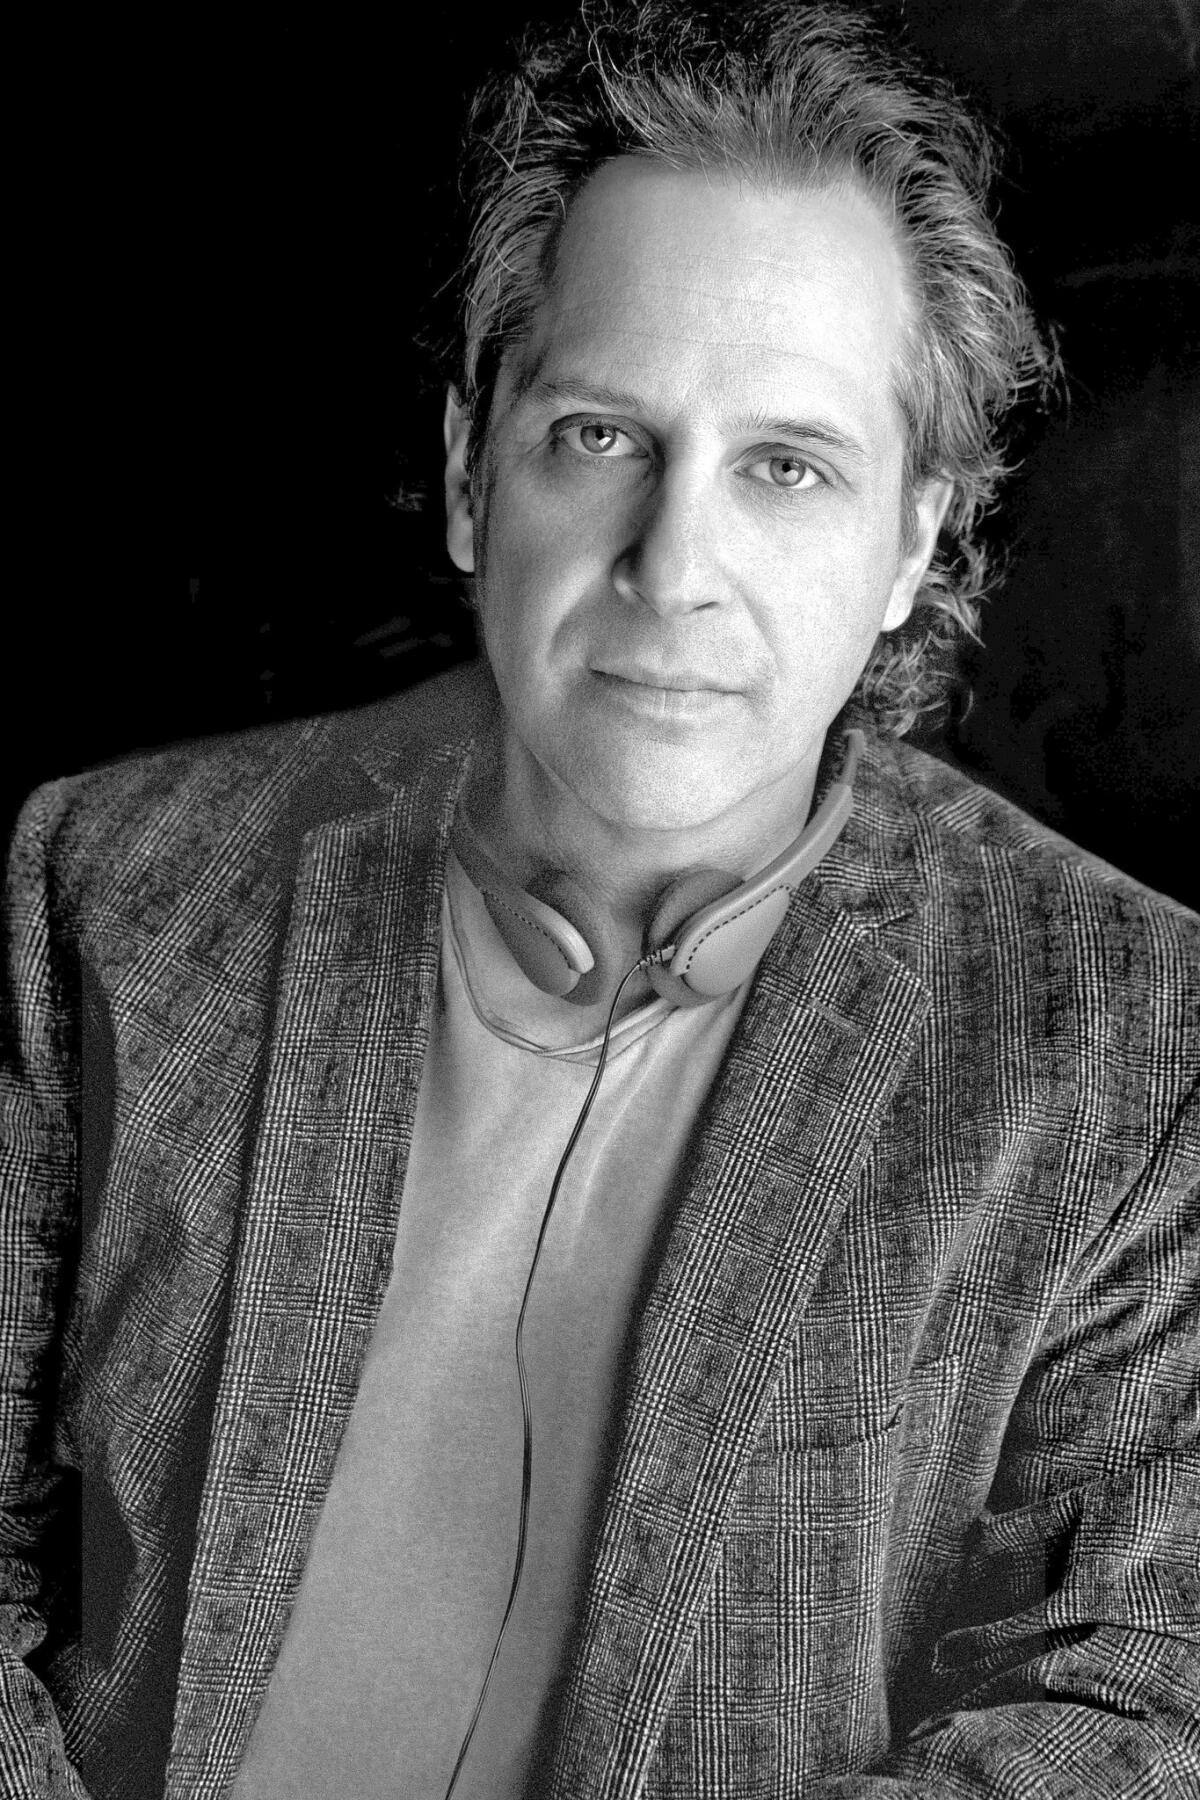 Television producer and writer Jason Katims is known for tackling emotional stories.